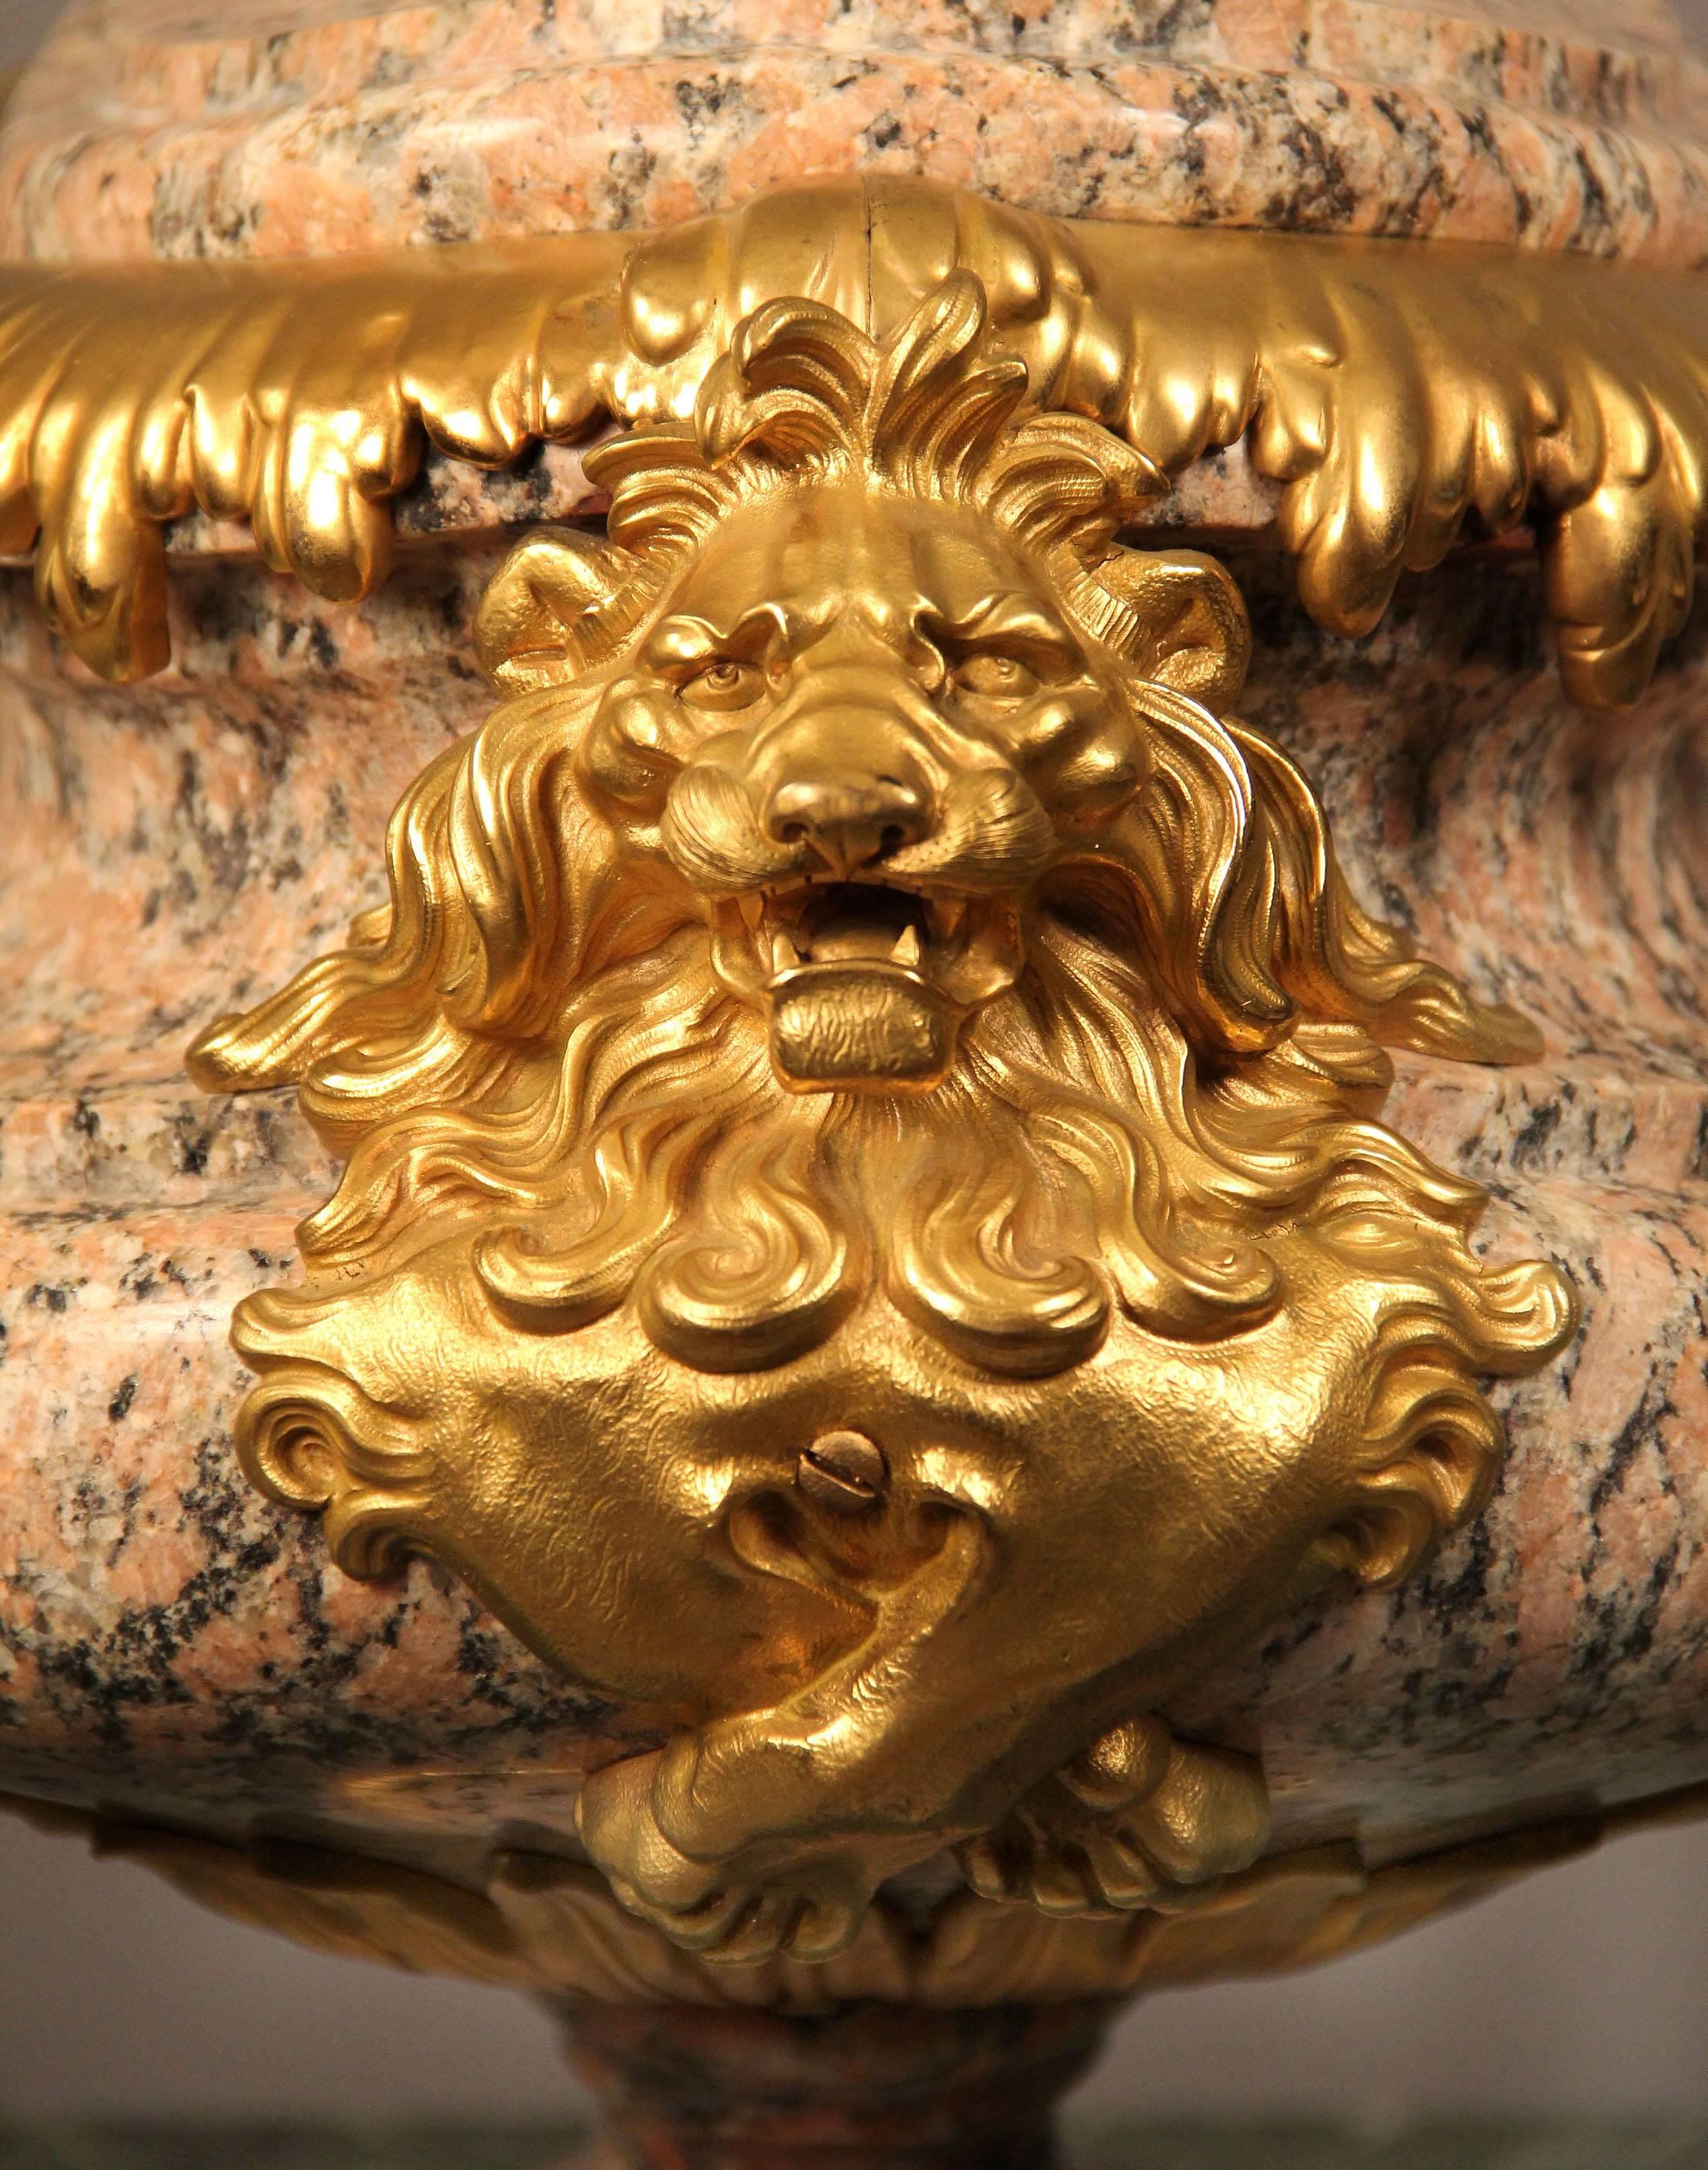 A very fine French late 19th century rose granite and gilt bronze-mounted centerpiece,

of oval form, the sides with lion masks and the incurved top surmounted by a berry and acanthus.